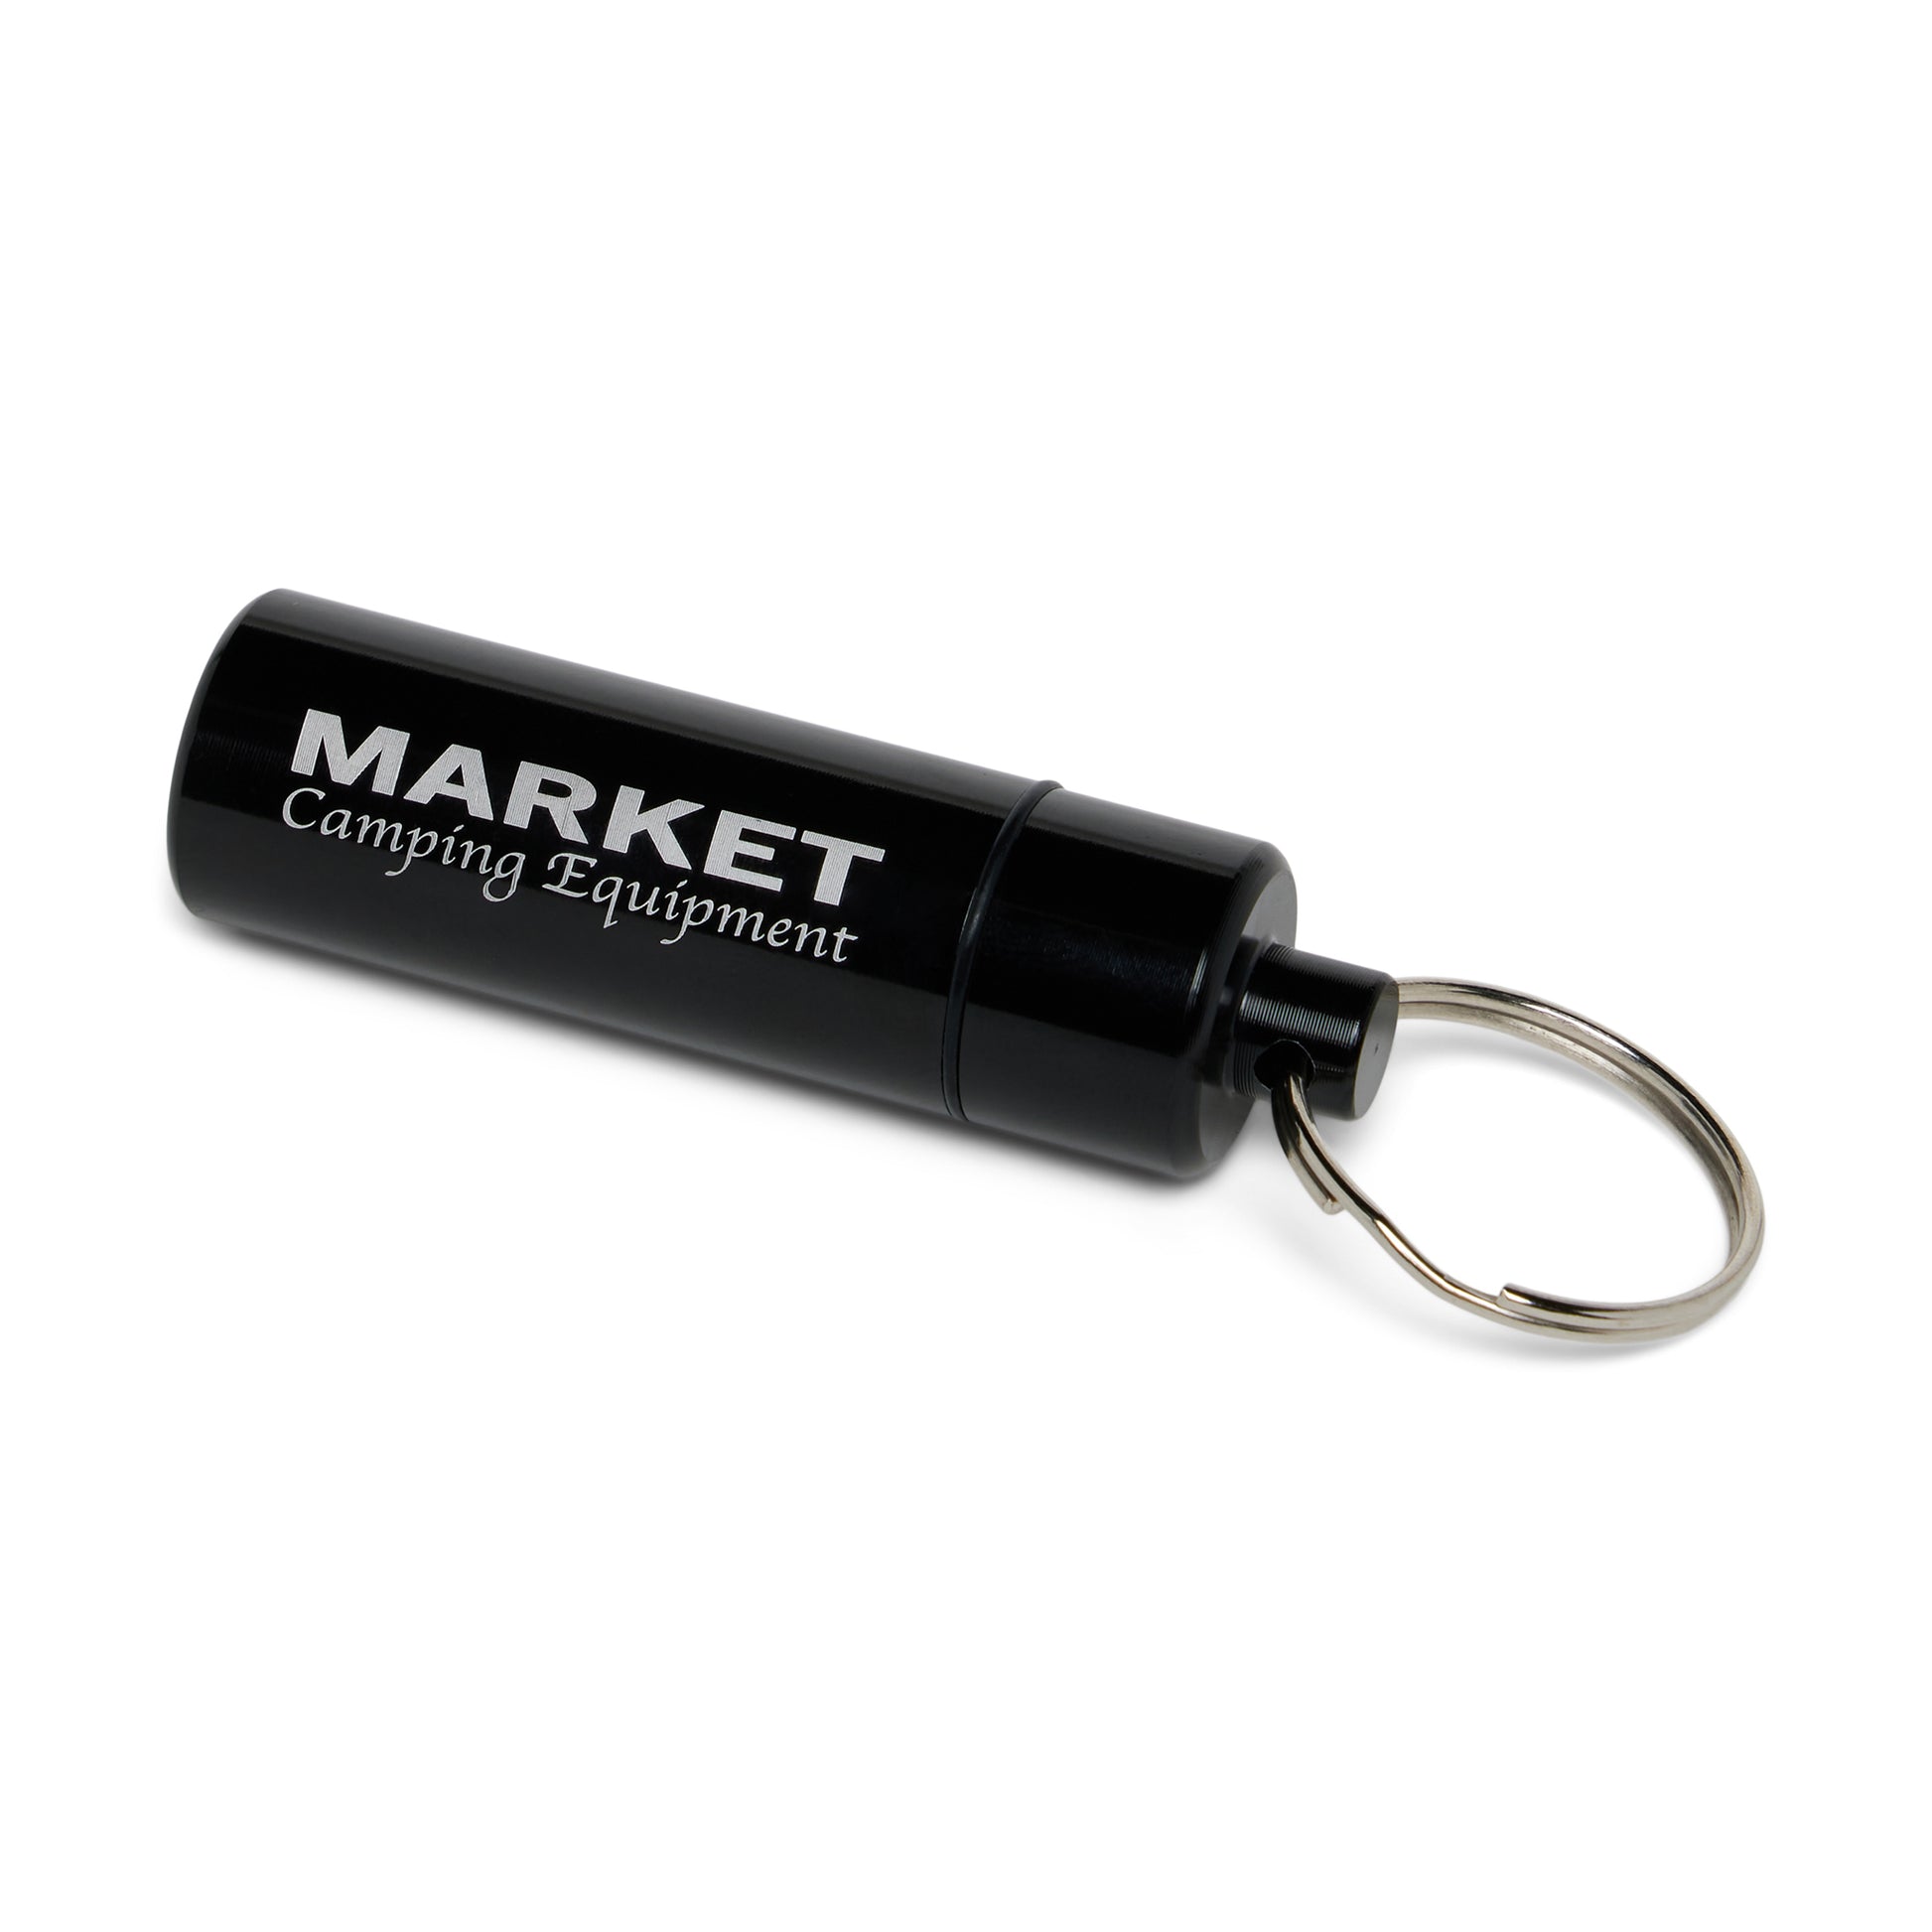 MARKET clothing brand LAND ESCAPE MATCHTUBE KEYCHAIN. Find more graphic tees, socks, hats and small goods at MarketStudios.com. Formally Chinatown Market. 